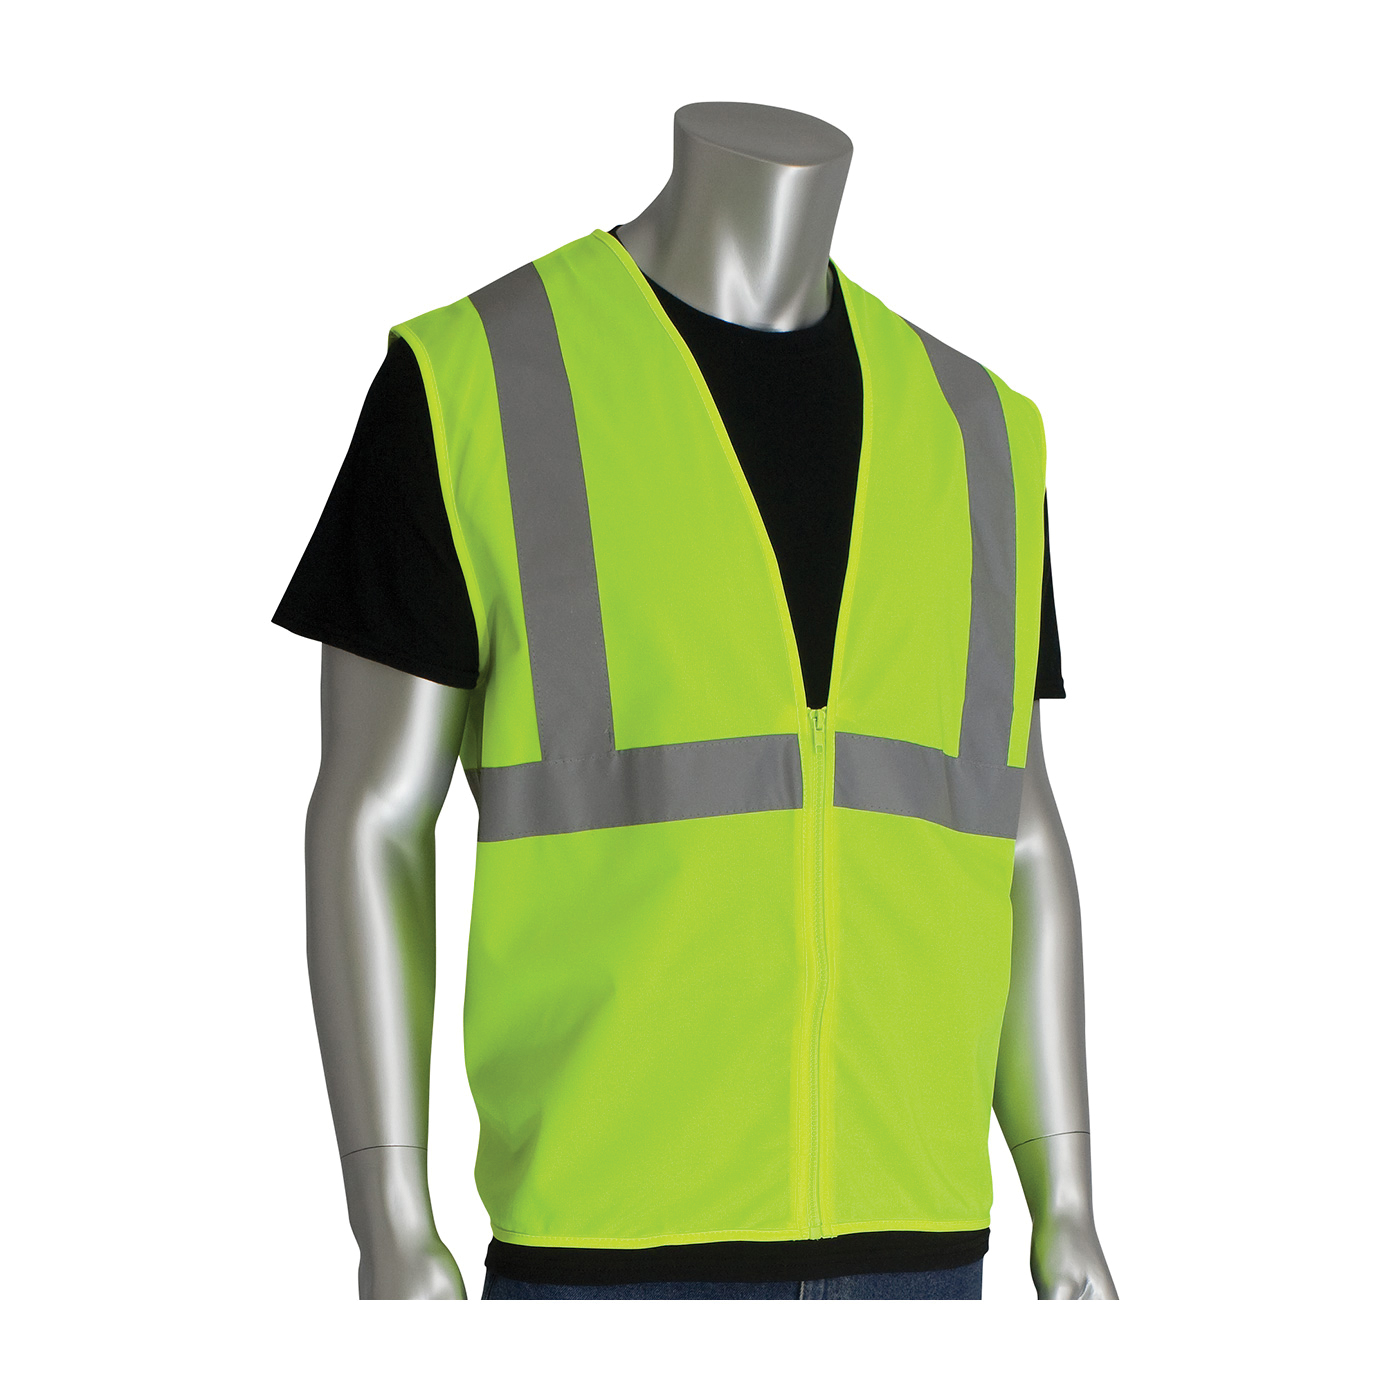 PIP® 302-WCENGZLY-2X Standard Solid Vest, 2XL, Hi-Viz Lime Yellow, Polyester Mesh, Zipper Closure, ANSI Class: Class 2, Specifications Met: ANSI 107 Type R Class 2